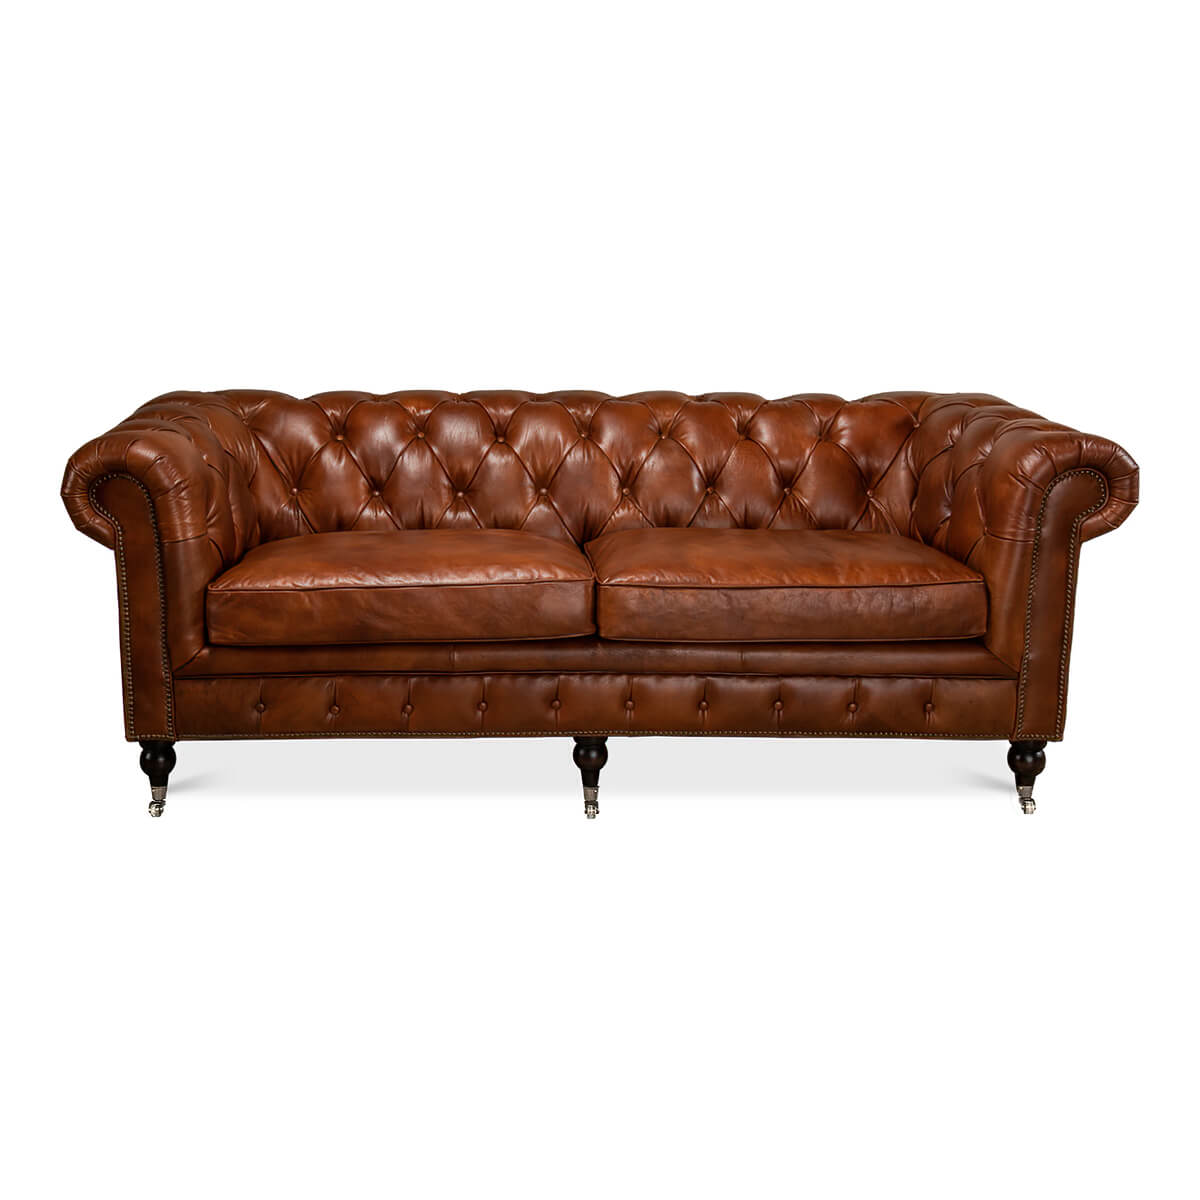 Vintage Style Classic Chesterfield Sofa - Brown Leather - English Georgian America